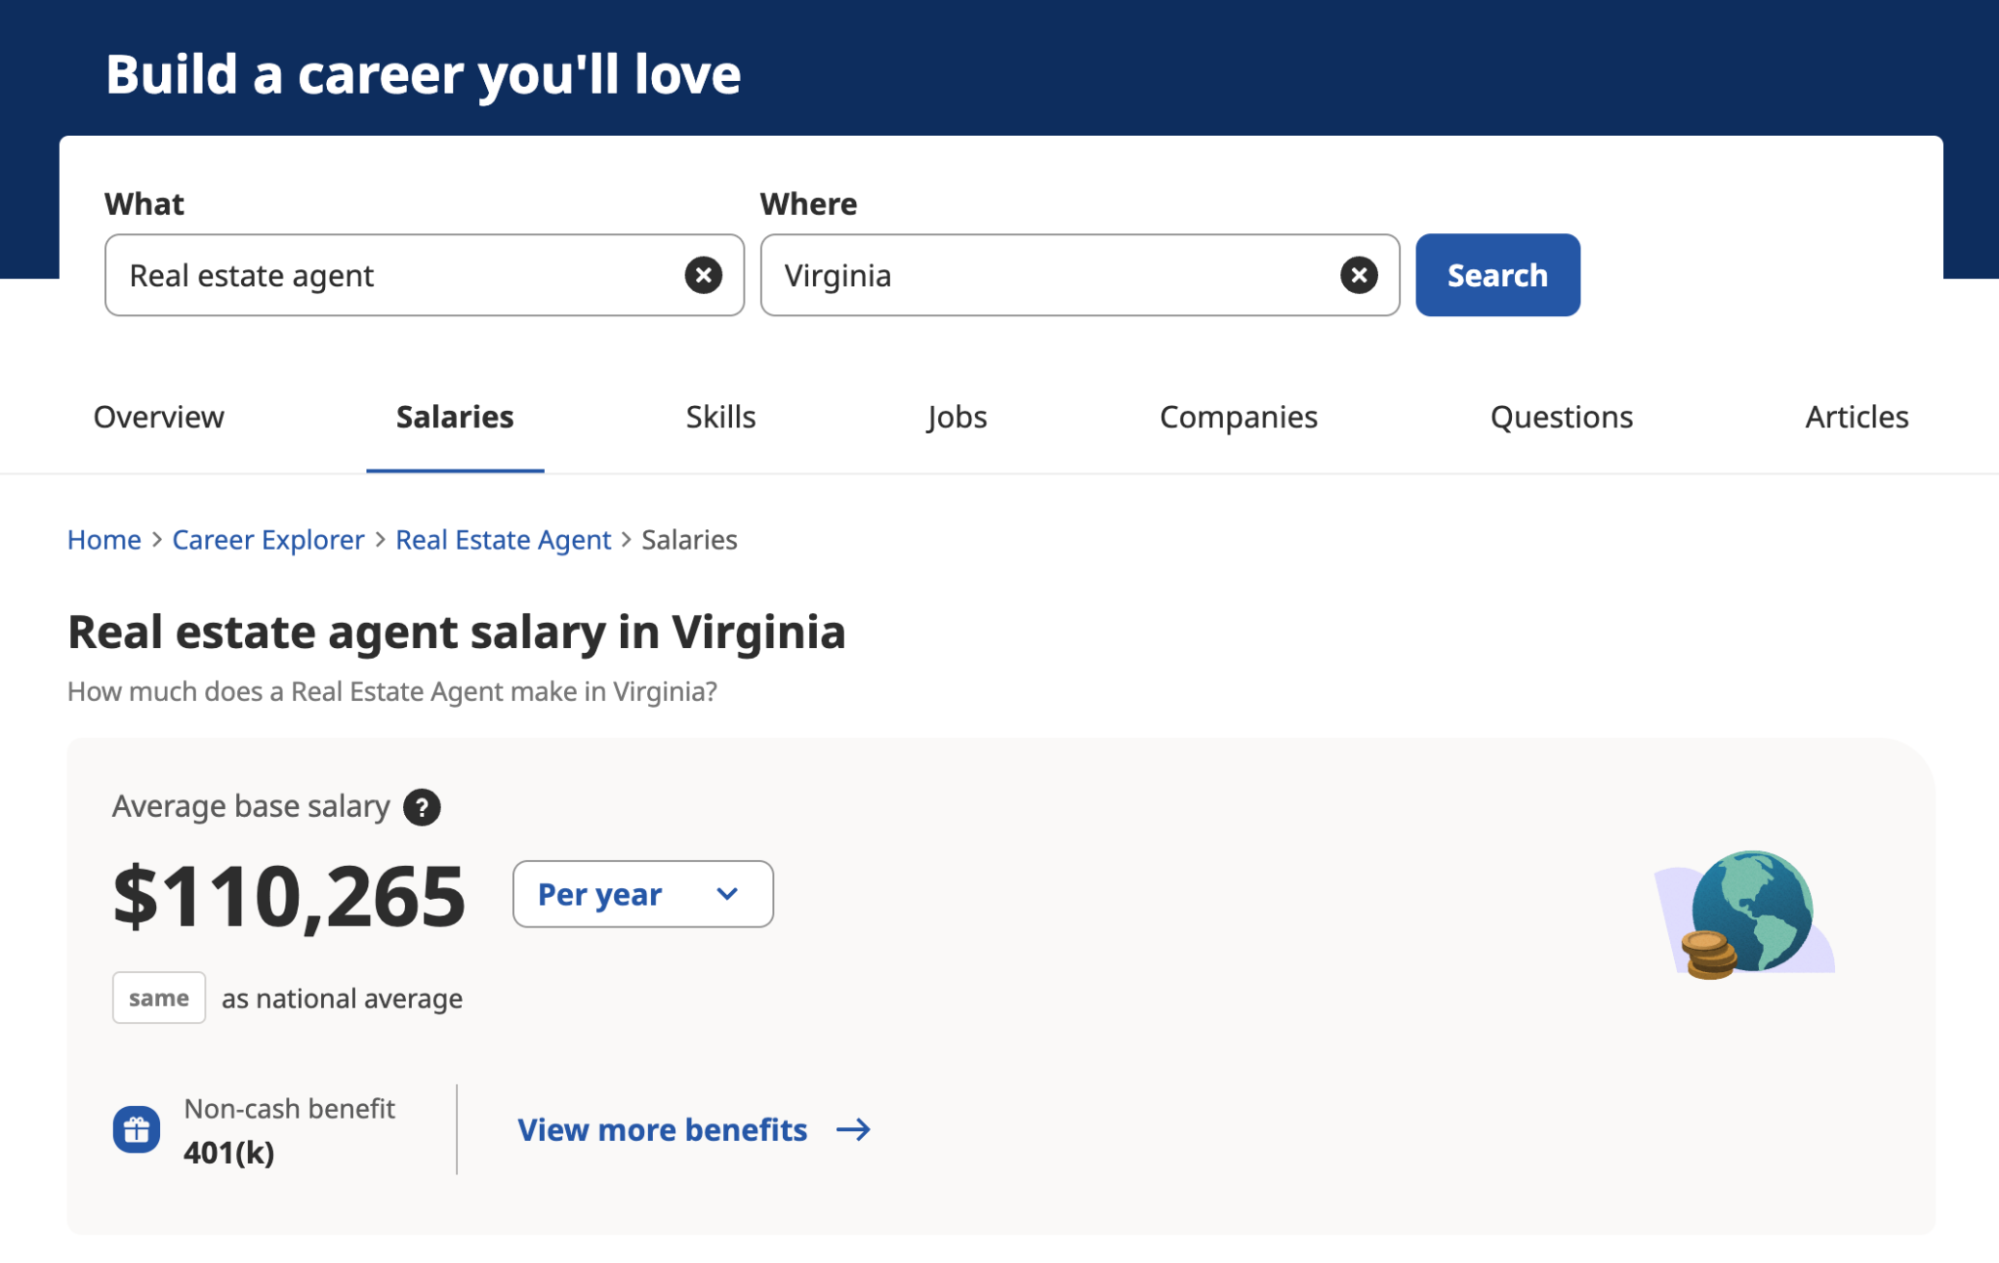 Real Estate Agents Salary in Virginia.